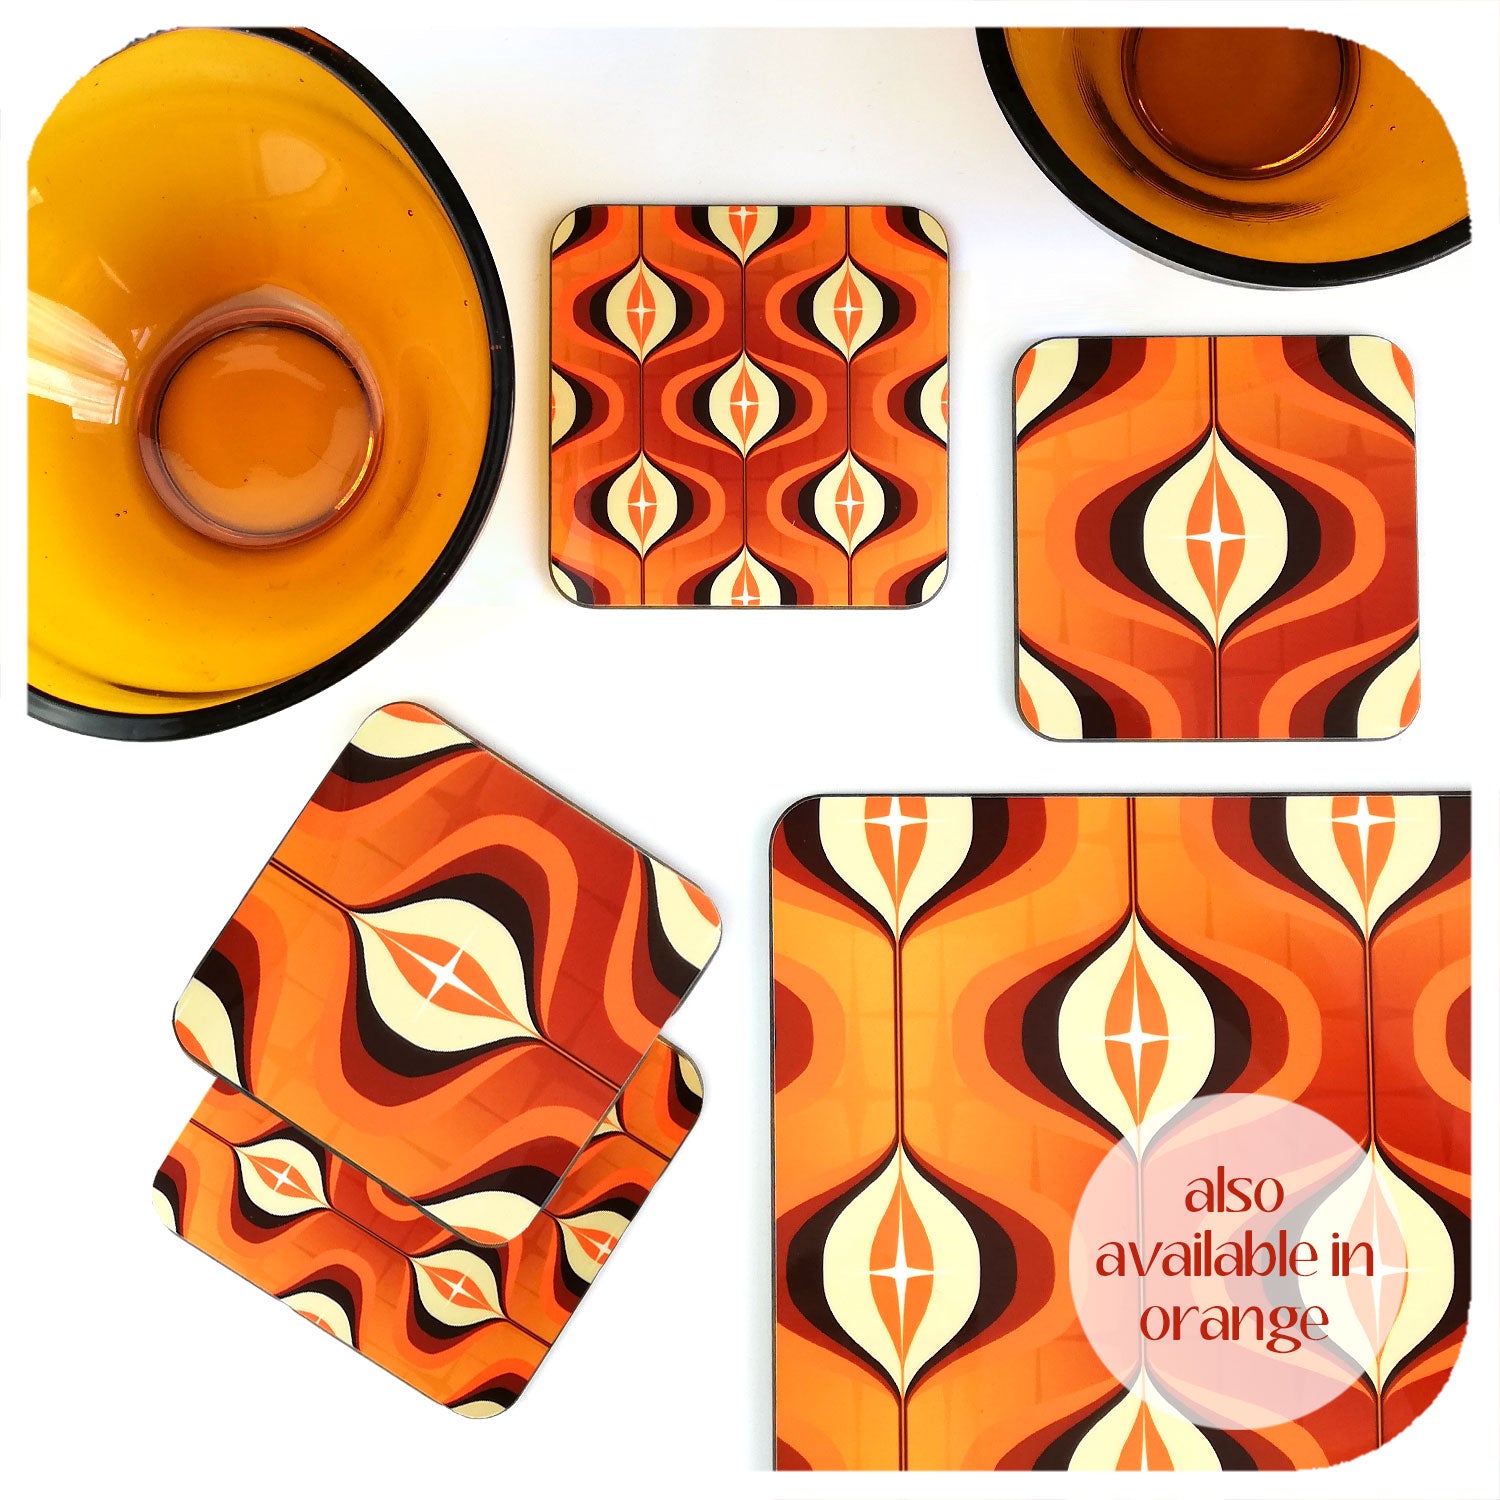 70s Op Art Tableware also available in Orange | The Inkabilly Emporium